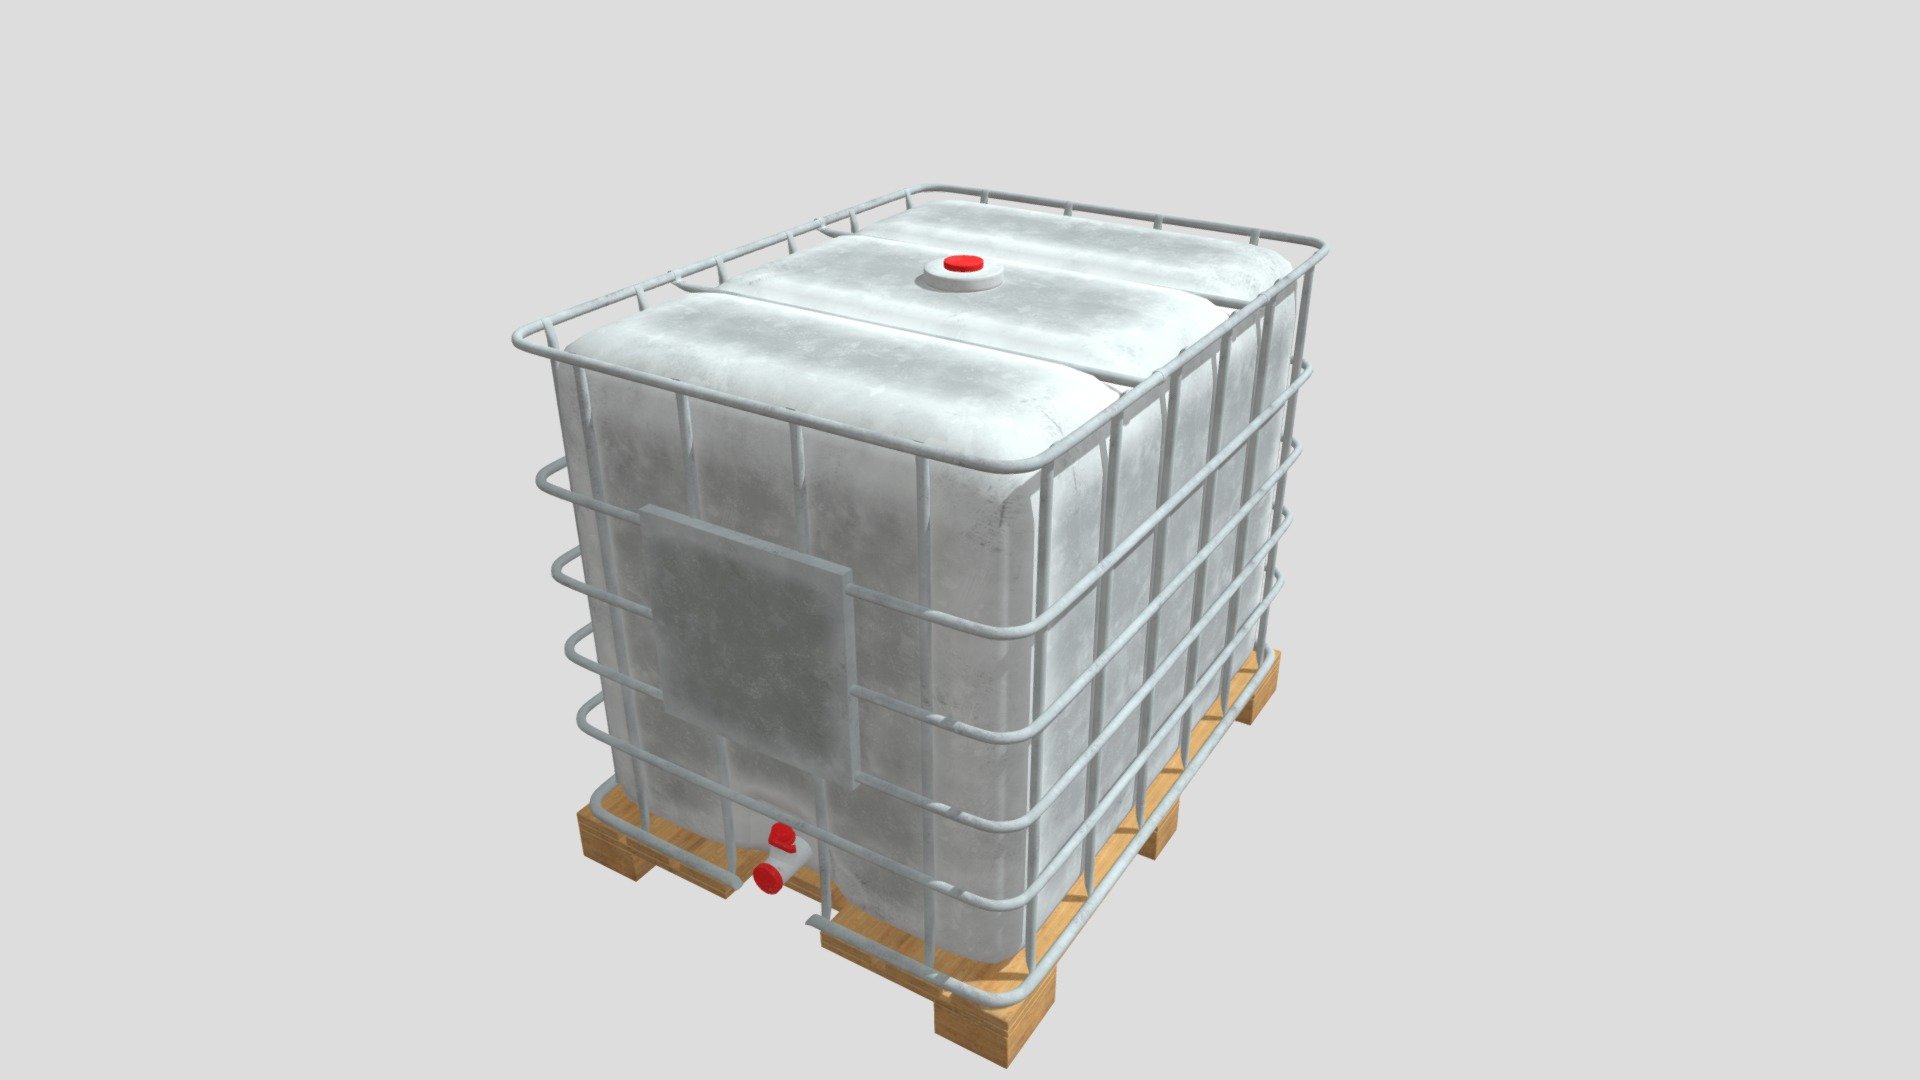 IBC Liquid Container 3d model built in Blender and rendered with Cycles, with PBR materials, Game-Ready.

File formats:
-.blend, rendered with cycles, as seen in the images;
-.obj, with materials applied and textures;
-.dae, with materials applied and textures;
-.fbx, with material slots applied;
-.stl;

3D Software:
This 3d model was originally created in Blender 2.79 and rendered with Cycles.

Materials and textures:
Materials and textures made in Substance Painter (PBR Workflow).
The model has materials applied in all formats, and is ready to import and render .
The model comes with multiple png image textures.

Preview scenes:
The preview images are rendered in Blender using its built-in render engine &lsquo;Cycles'.
Note that the blend files come directly with the rendering scene included and the render command will generate the exact result as seen in previews.

General:
The models are built strictly out of quads, with low poly counts, ideal for games, but also detailed enough for high fidelity renders 3d model